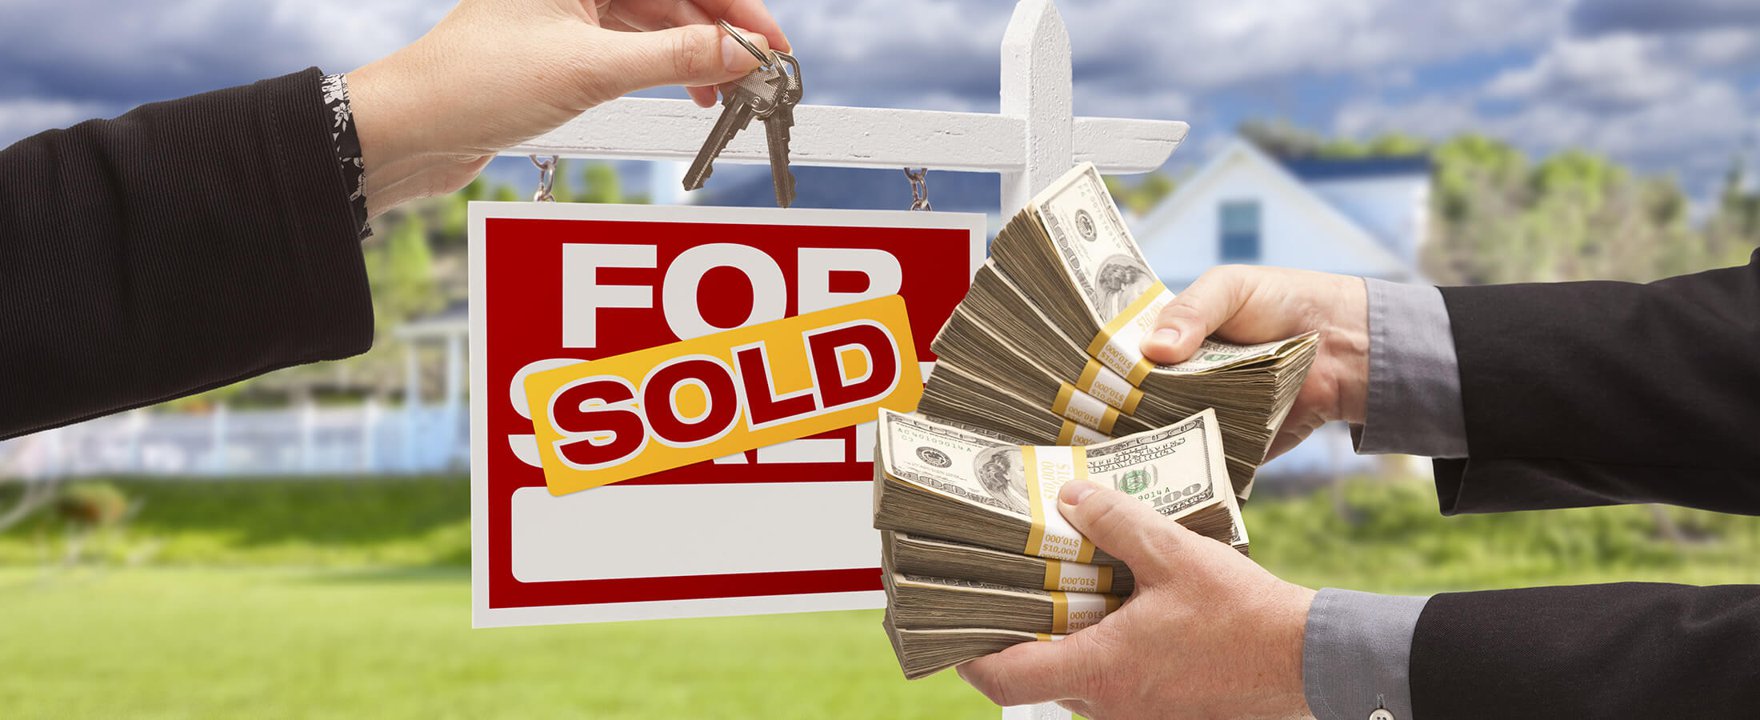 We Buy Homes Sell your home with Instant Cash Offer and skip the hassle of fixing your home, settin